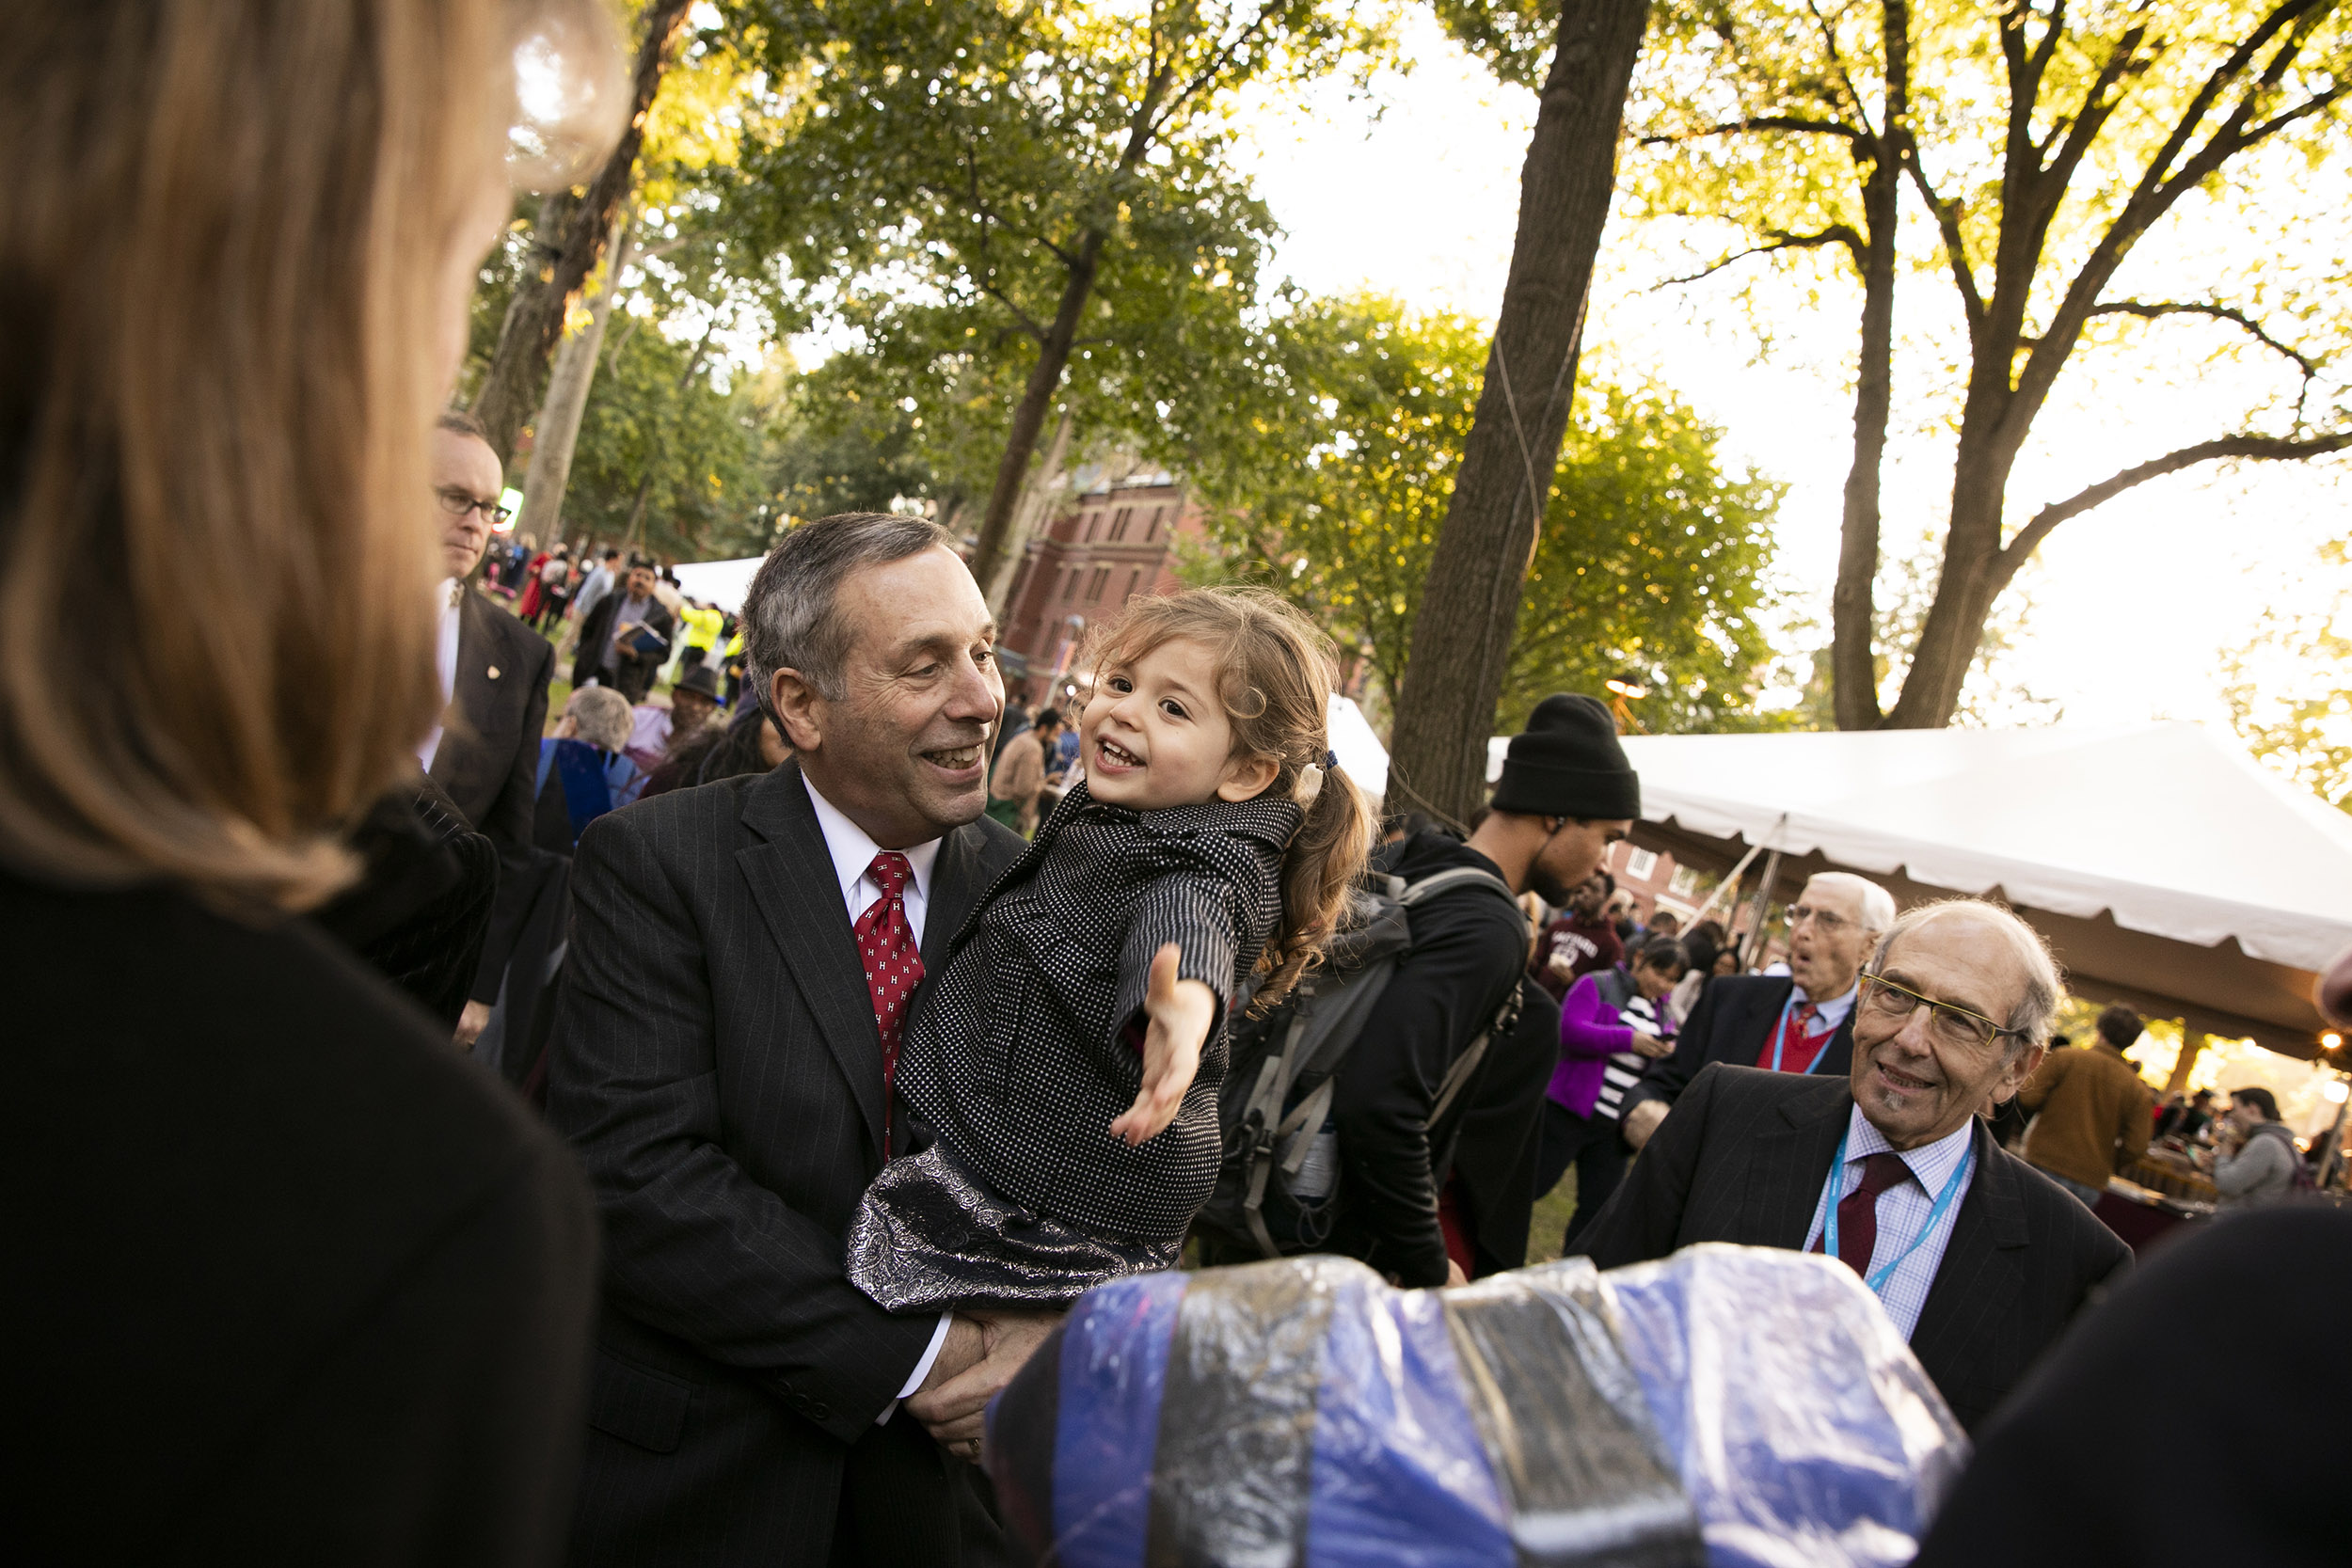 Larry Bacow with granddaughter at his inauguration as Harvard president.